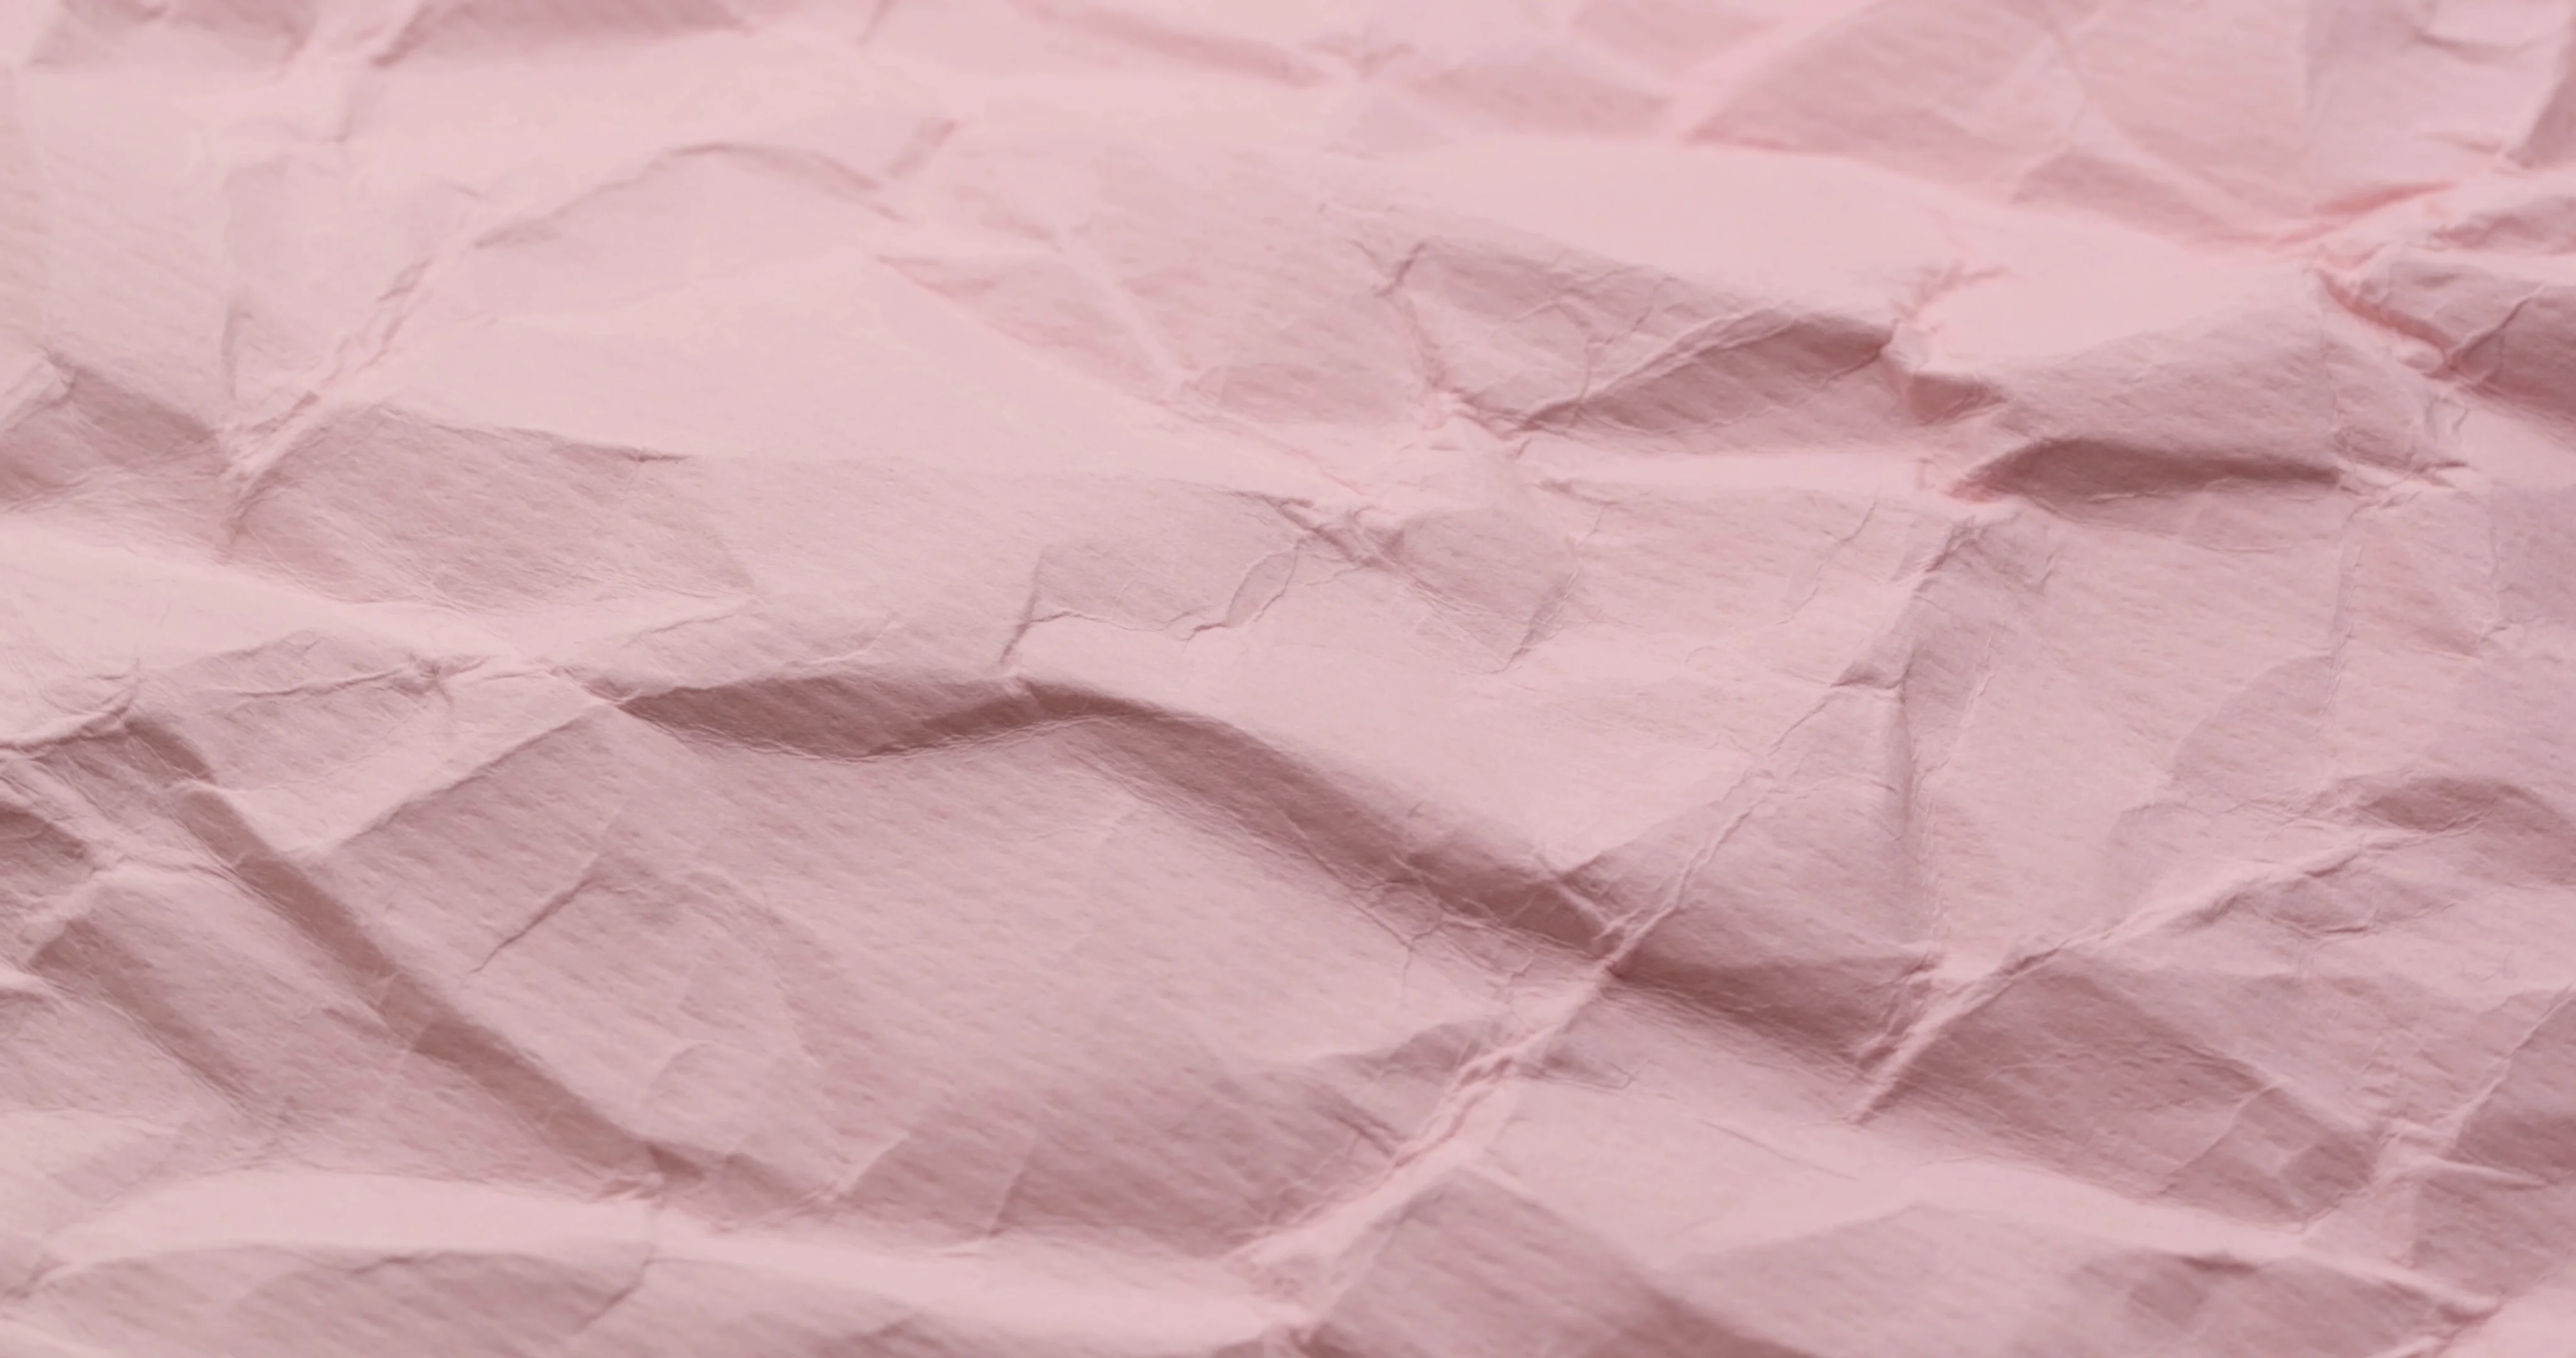 Wrinkle pink paper texture in rotation, Stock Video